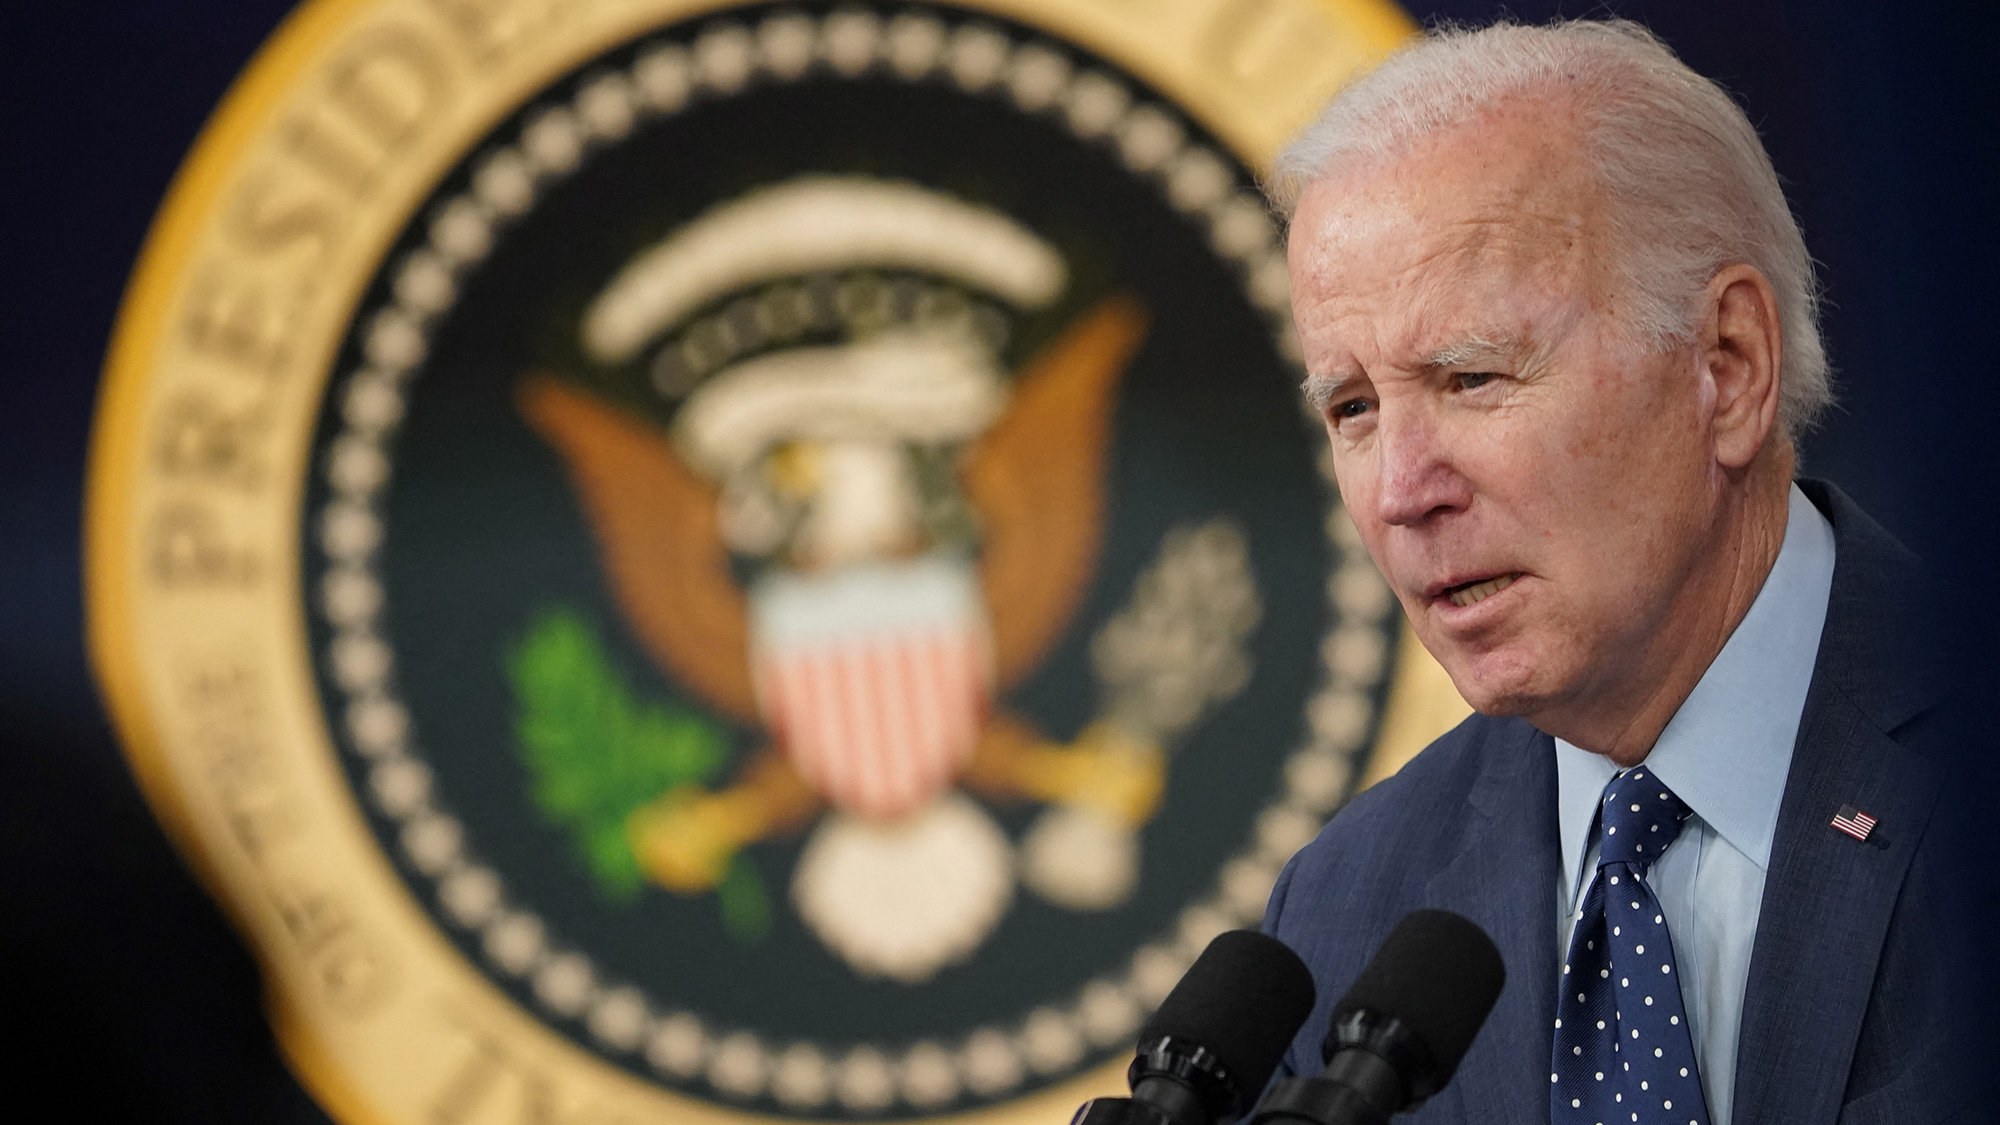 President Joe Biden arrives to speak about the administration's response to recent aerial objects at the White House House in Washington, DC, on February 16.